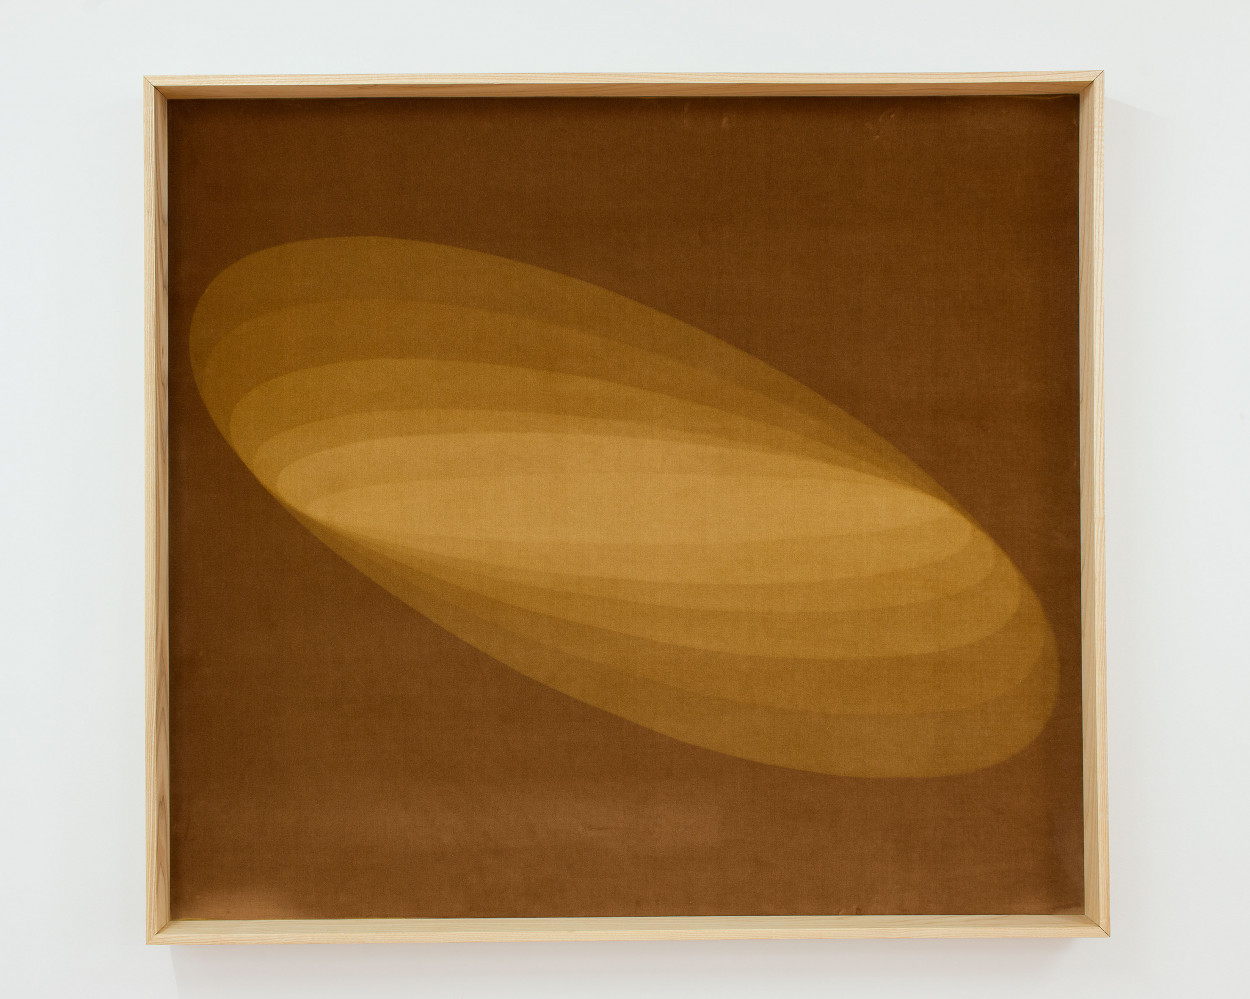 velvet on wooden board, wooden frame 90 x 100 x 7 cm; courtesy the artist and Pola Magnetyczne Gallery, Warsaw